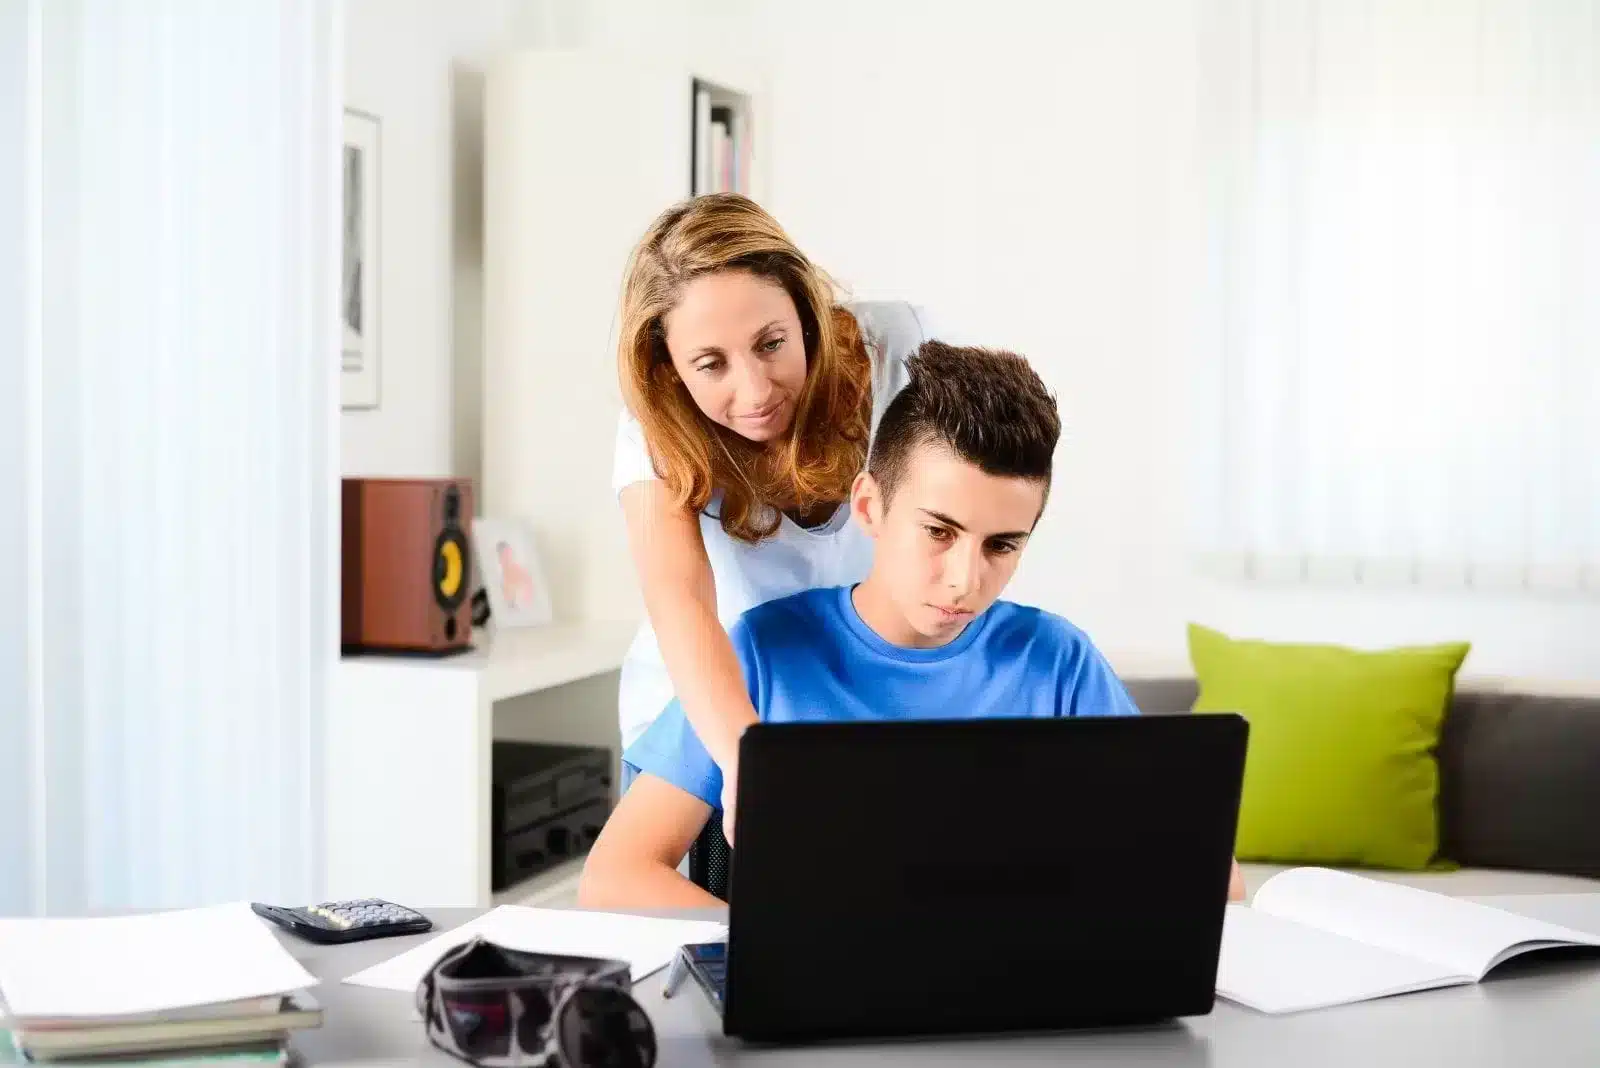 Boy Study with laptop with his mother in his back teaching